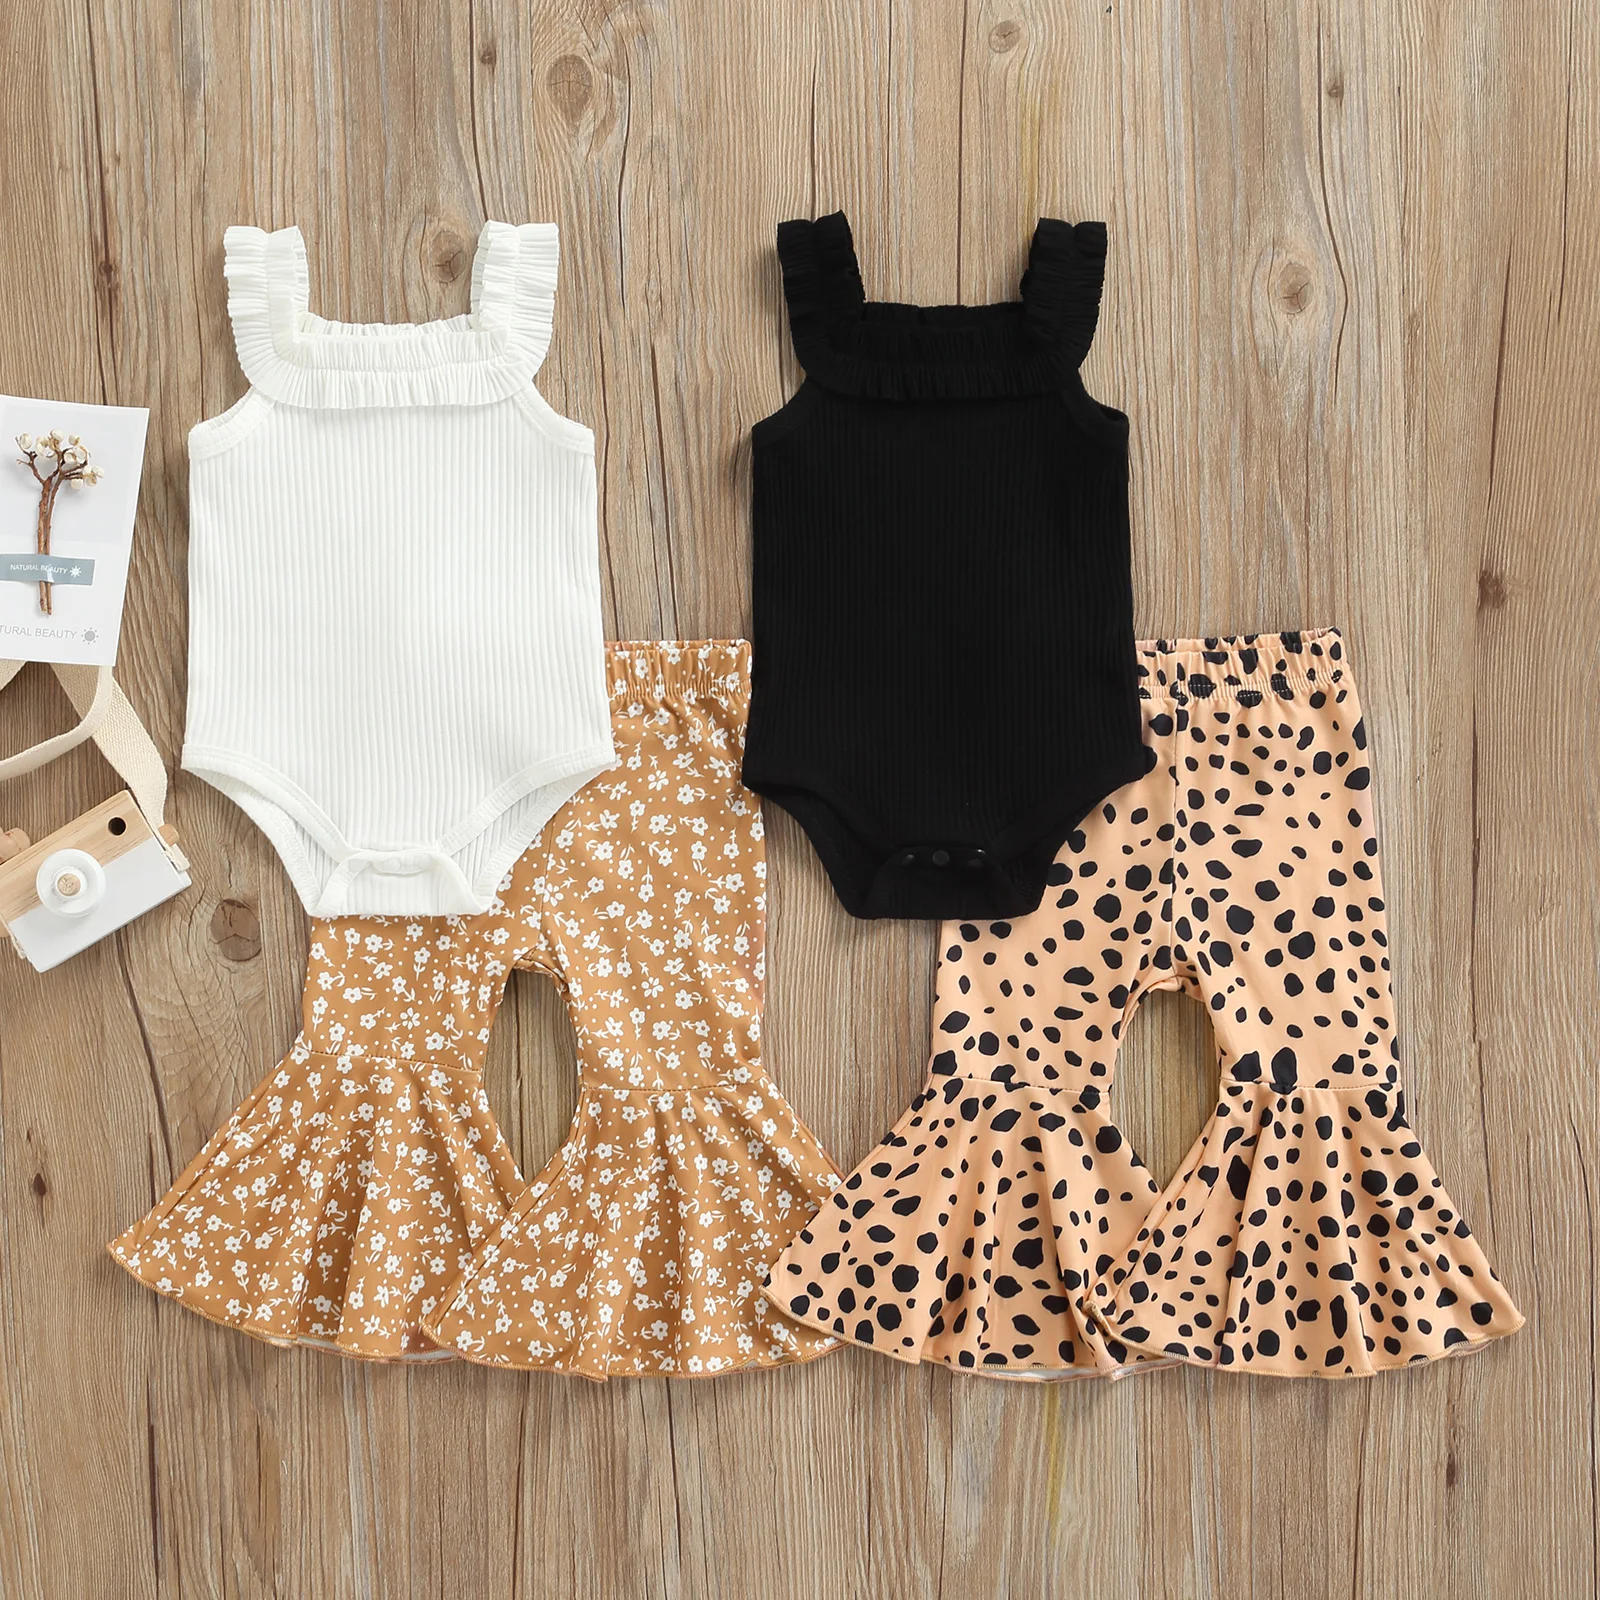 2022 0-18M Cute Baby Girl Clothing Set Ruffle White/Black Sleeveless Square Collar Romper+Floral/Leopard Flare Pants Summer 2pcs Baby Clothing Set comfotable